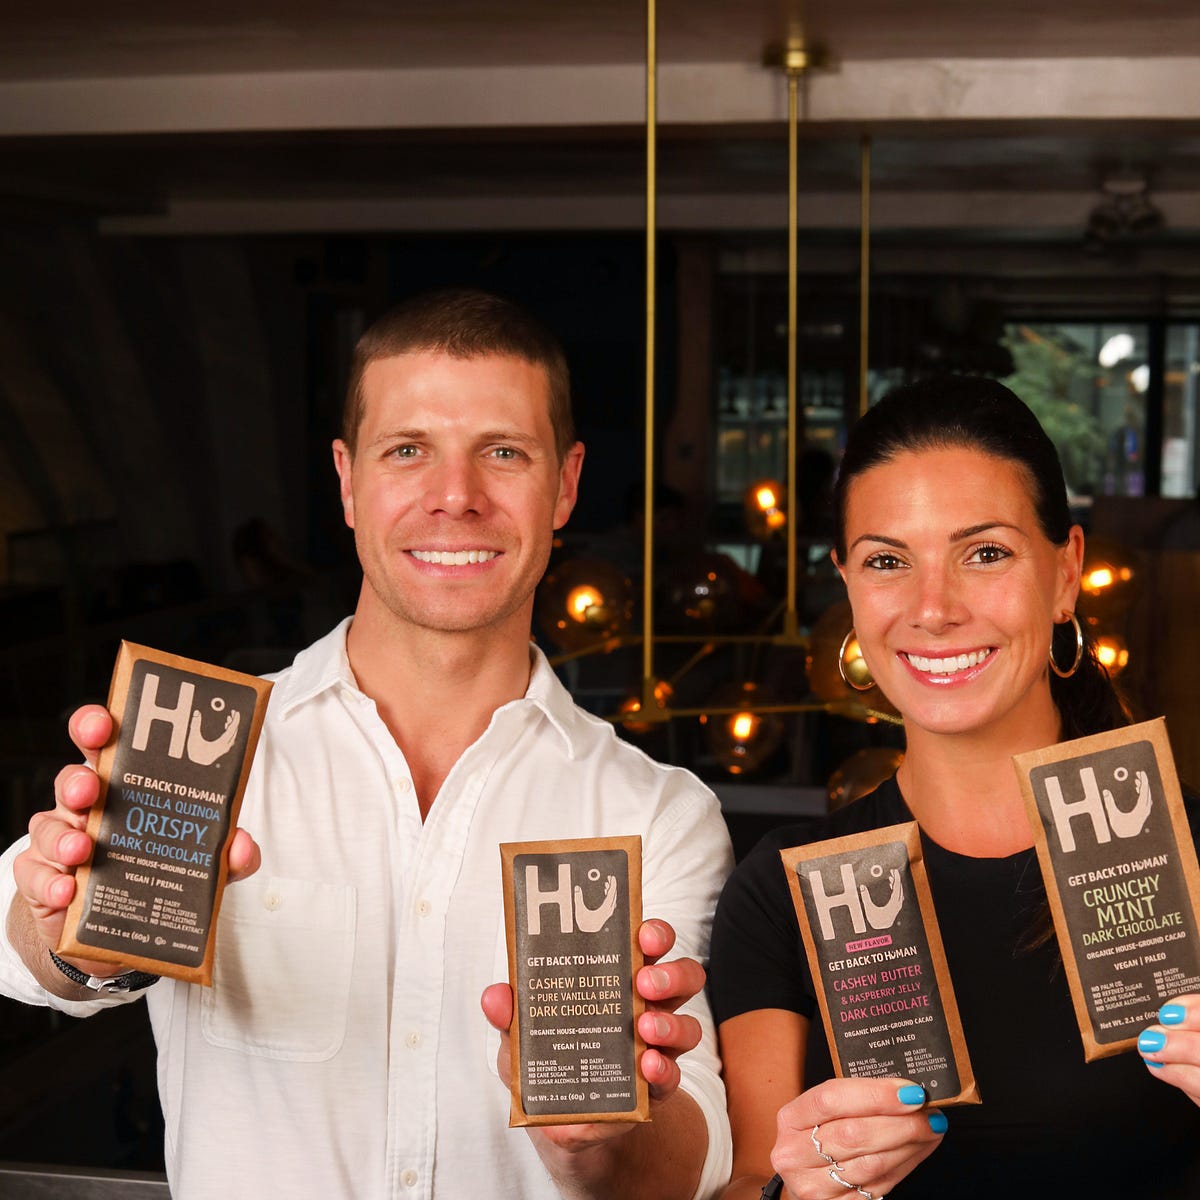 Jordan Brown And Jessica Karp Of Hu Kitchen And Products Why Wed Like To Start A Movement For People To Look At Ingredient Lists First By Alexandra Spirer Authority Magazine